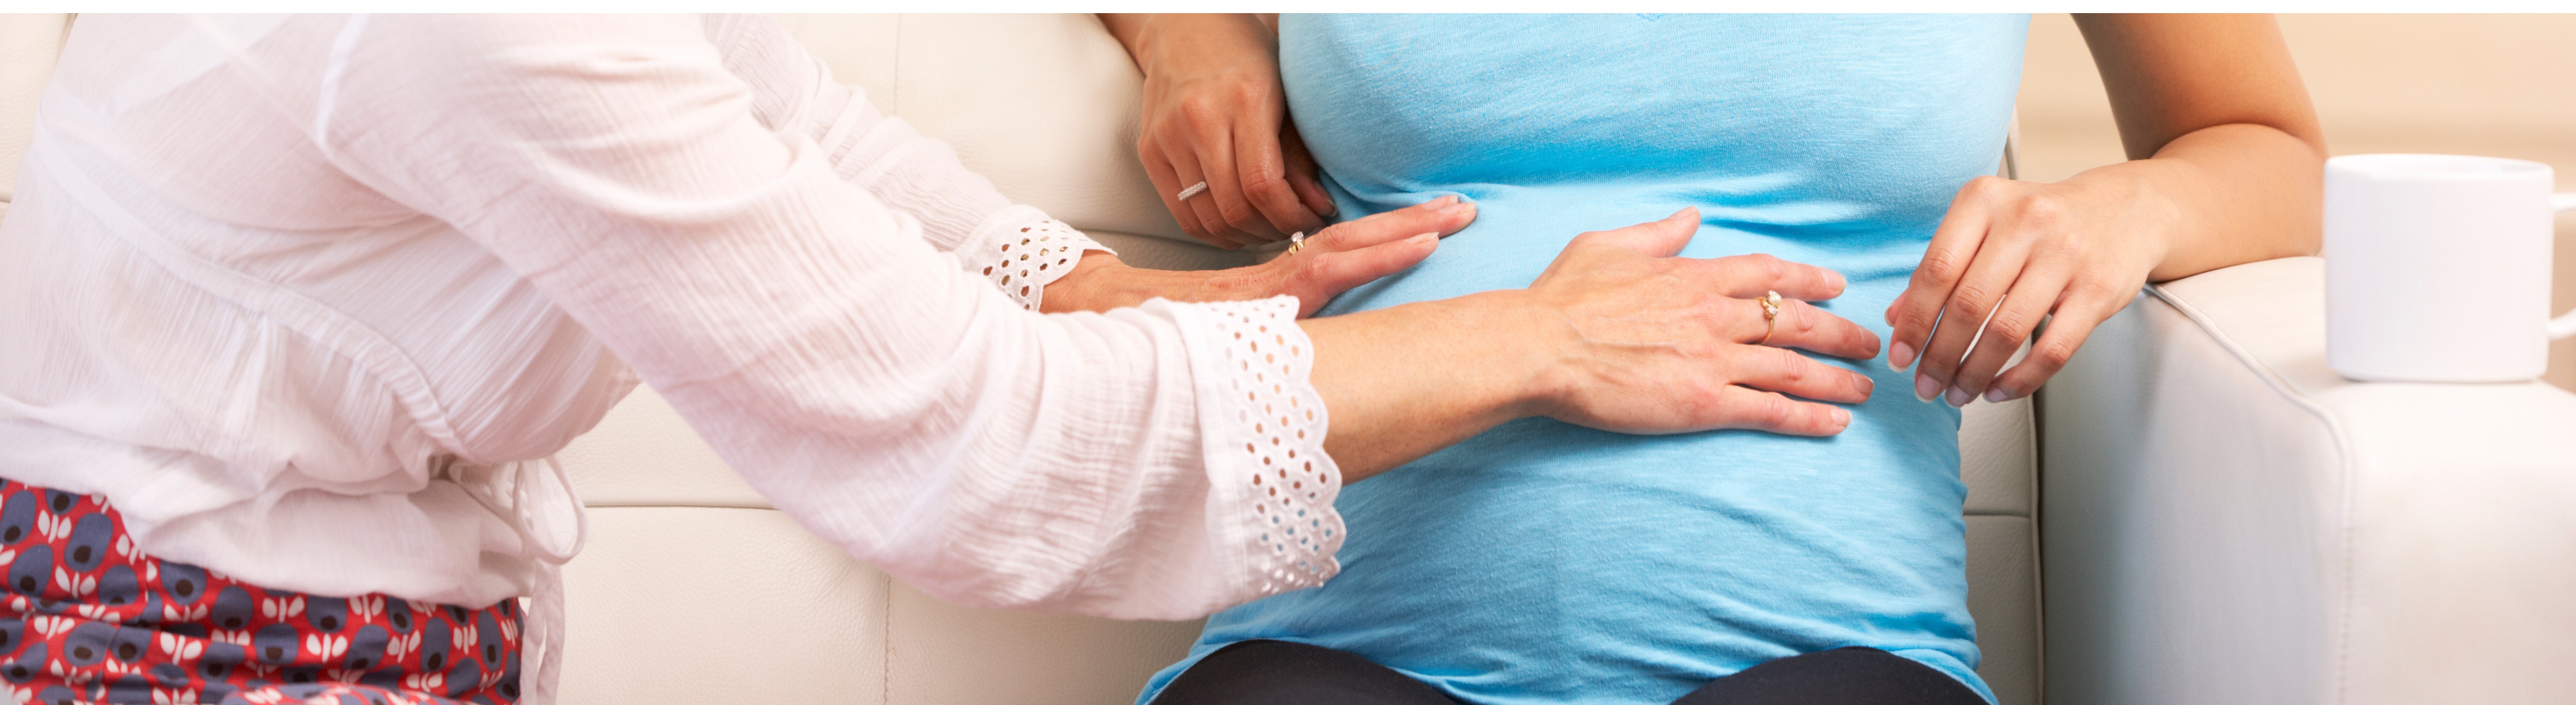 woman touching someone's pregnant belly